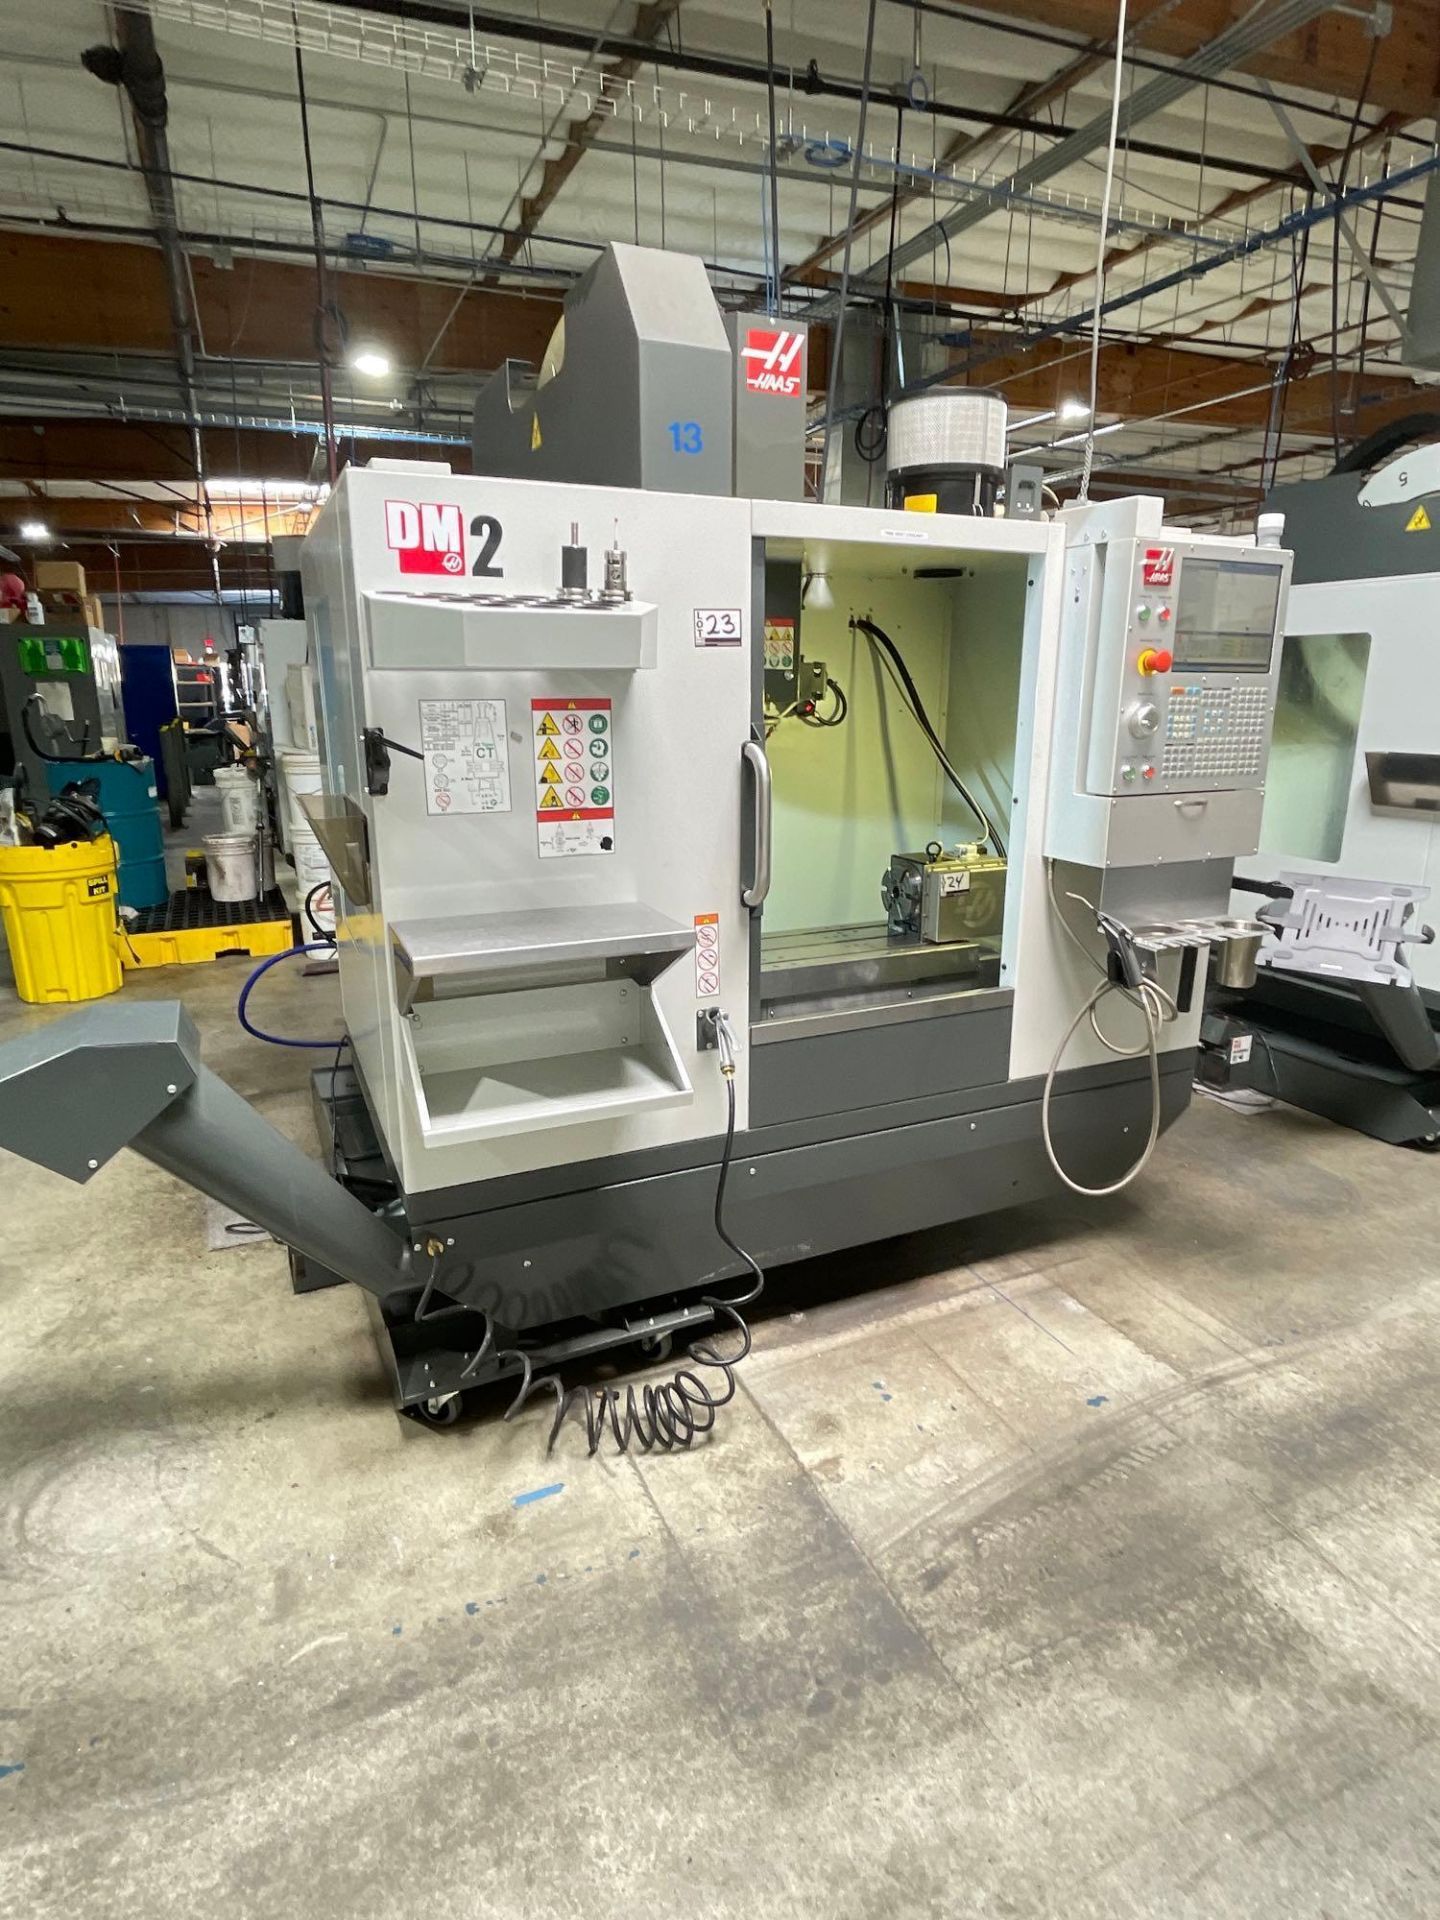 Haas DM-2, 28” x 16” x 15.5” Travels, CT 40, 18+1 SMTC, CTS, WIPS, as New as 2021 - Image 4 of 13